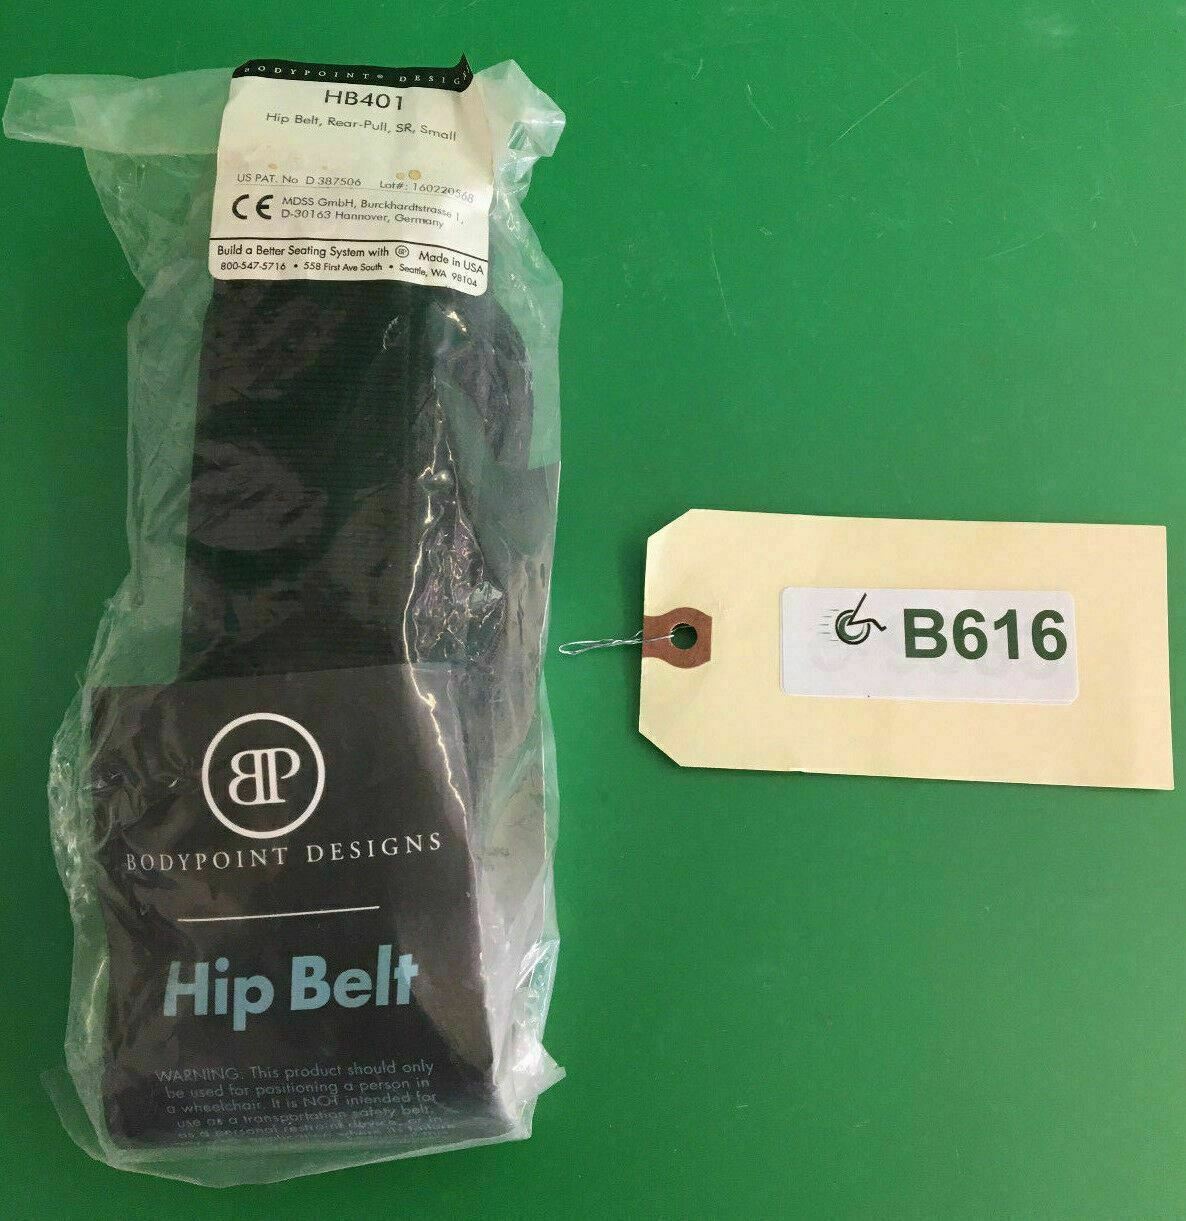 Bodypoint Hip Belt, Rear-Pull, SR, Small for Wheelchair (HB401) #B616